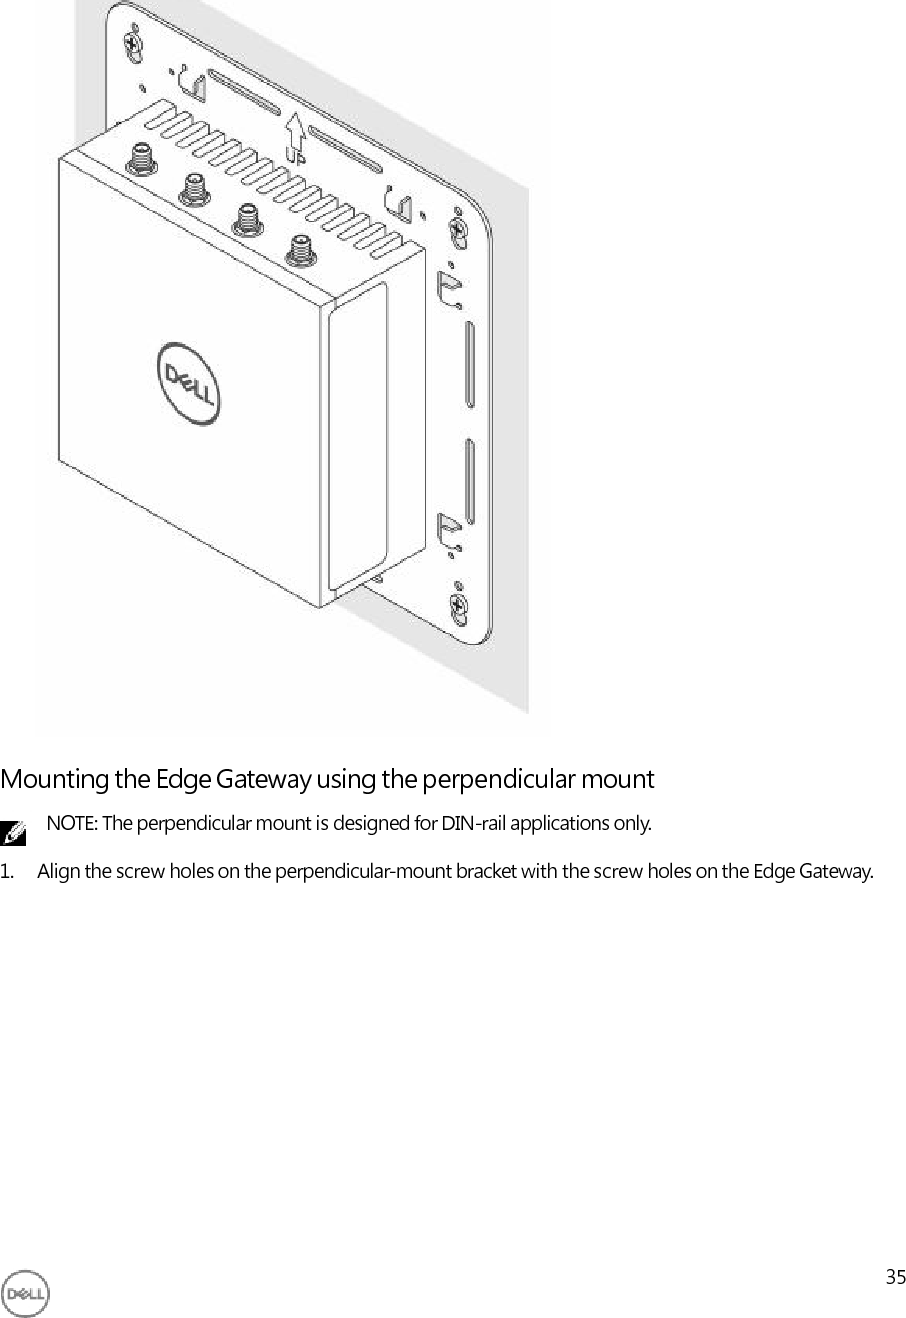                                       Mounting the Edge Gateway using the perpendicular mount NOTE: The perpendicular mount is designed for DIN-rail applications only. 1. Align the screw holes on the perpendicular-mount bracket with the screw holes on the Edge Gateway.                35